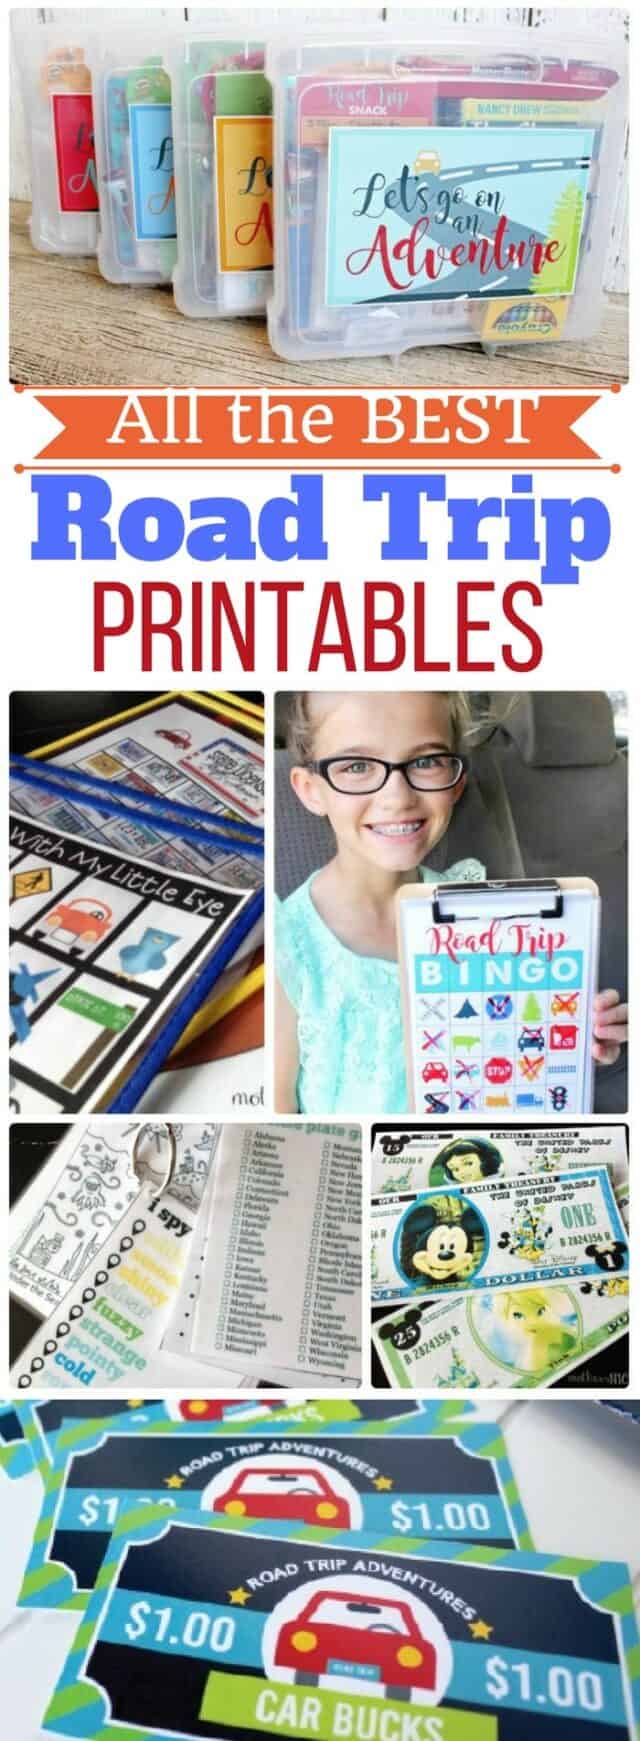 All the Travel Printables you will ever need: packing list, incentives, luggage tags, and activities for the kids